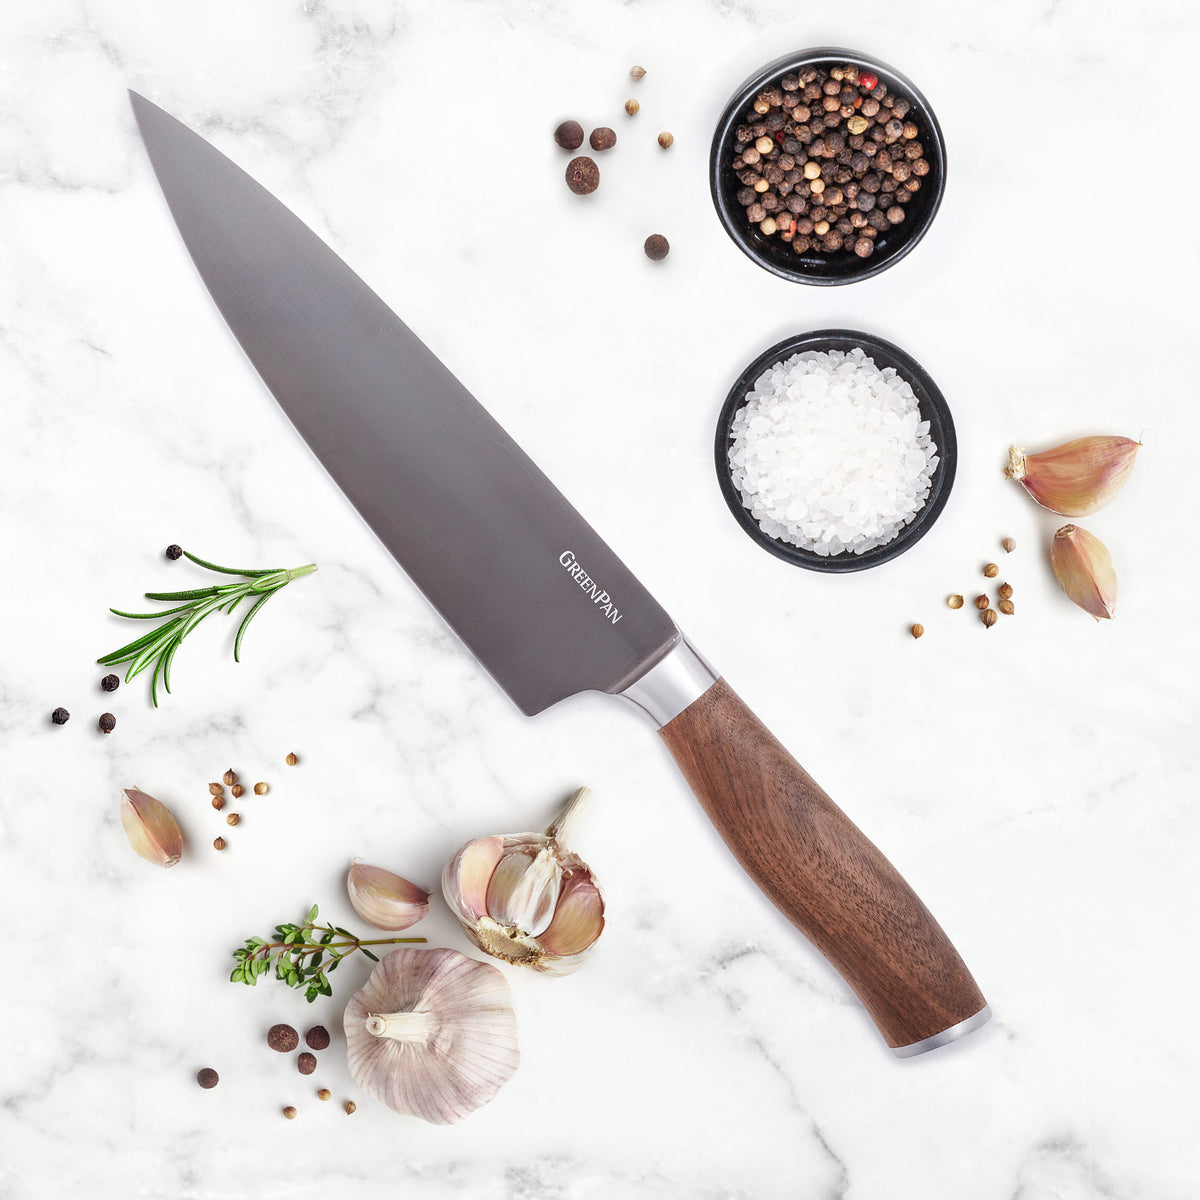 Premiere Titanium Cutlery 8 Chef's Knife with Walnut Handle